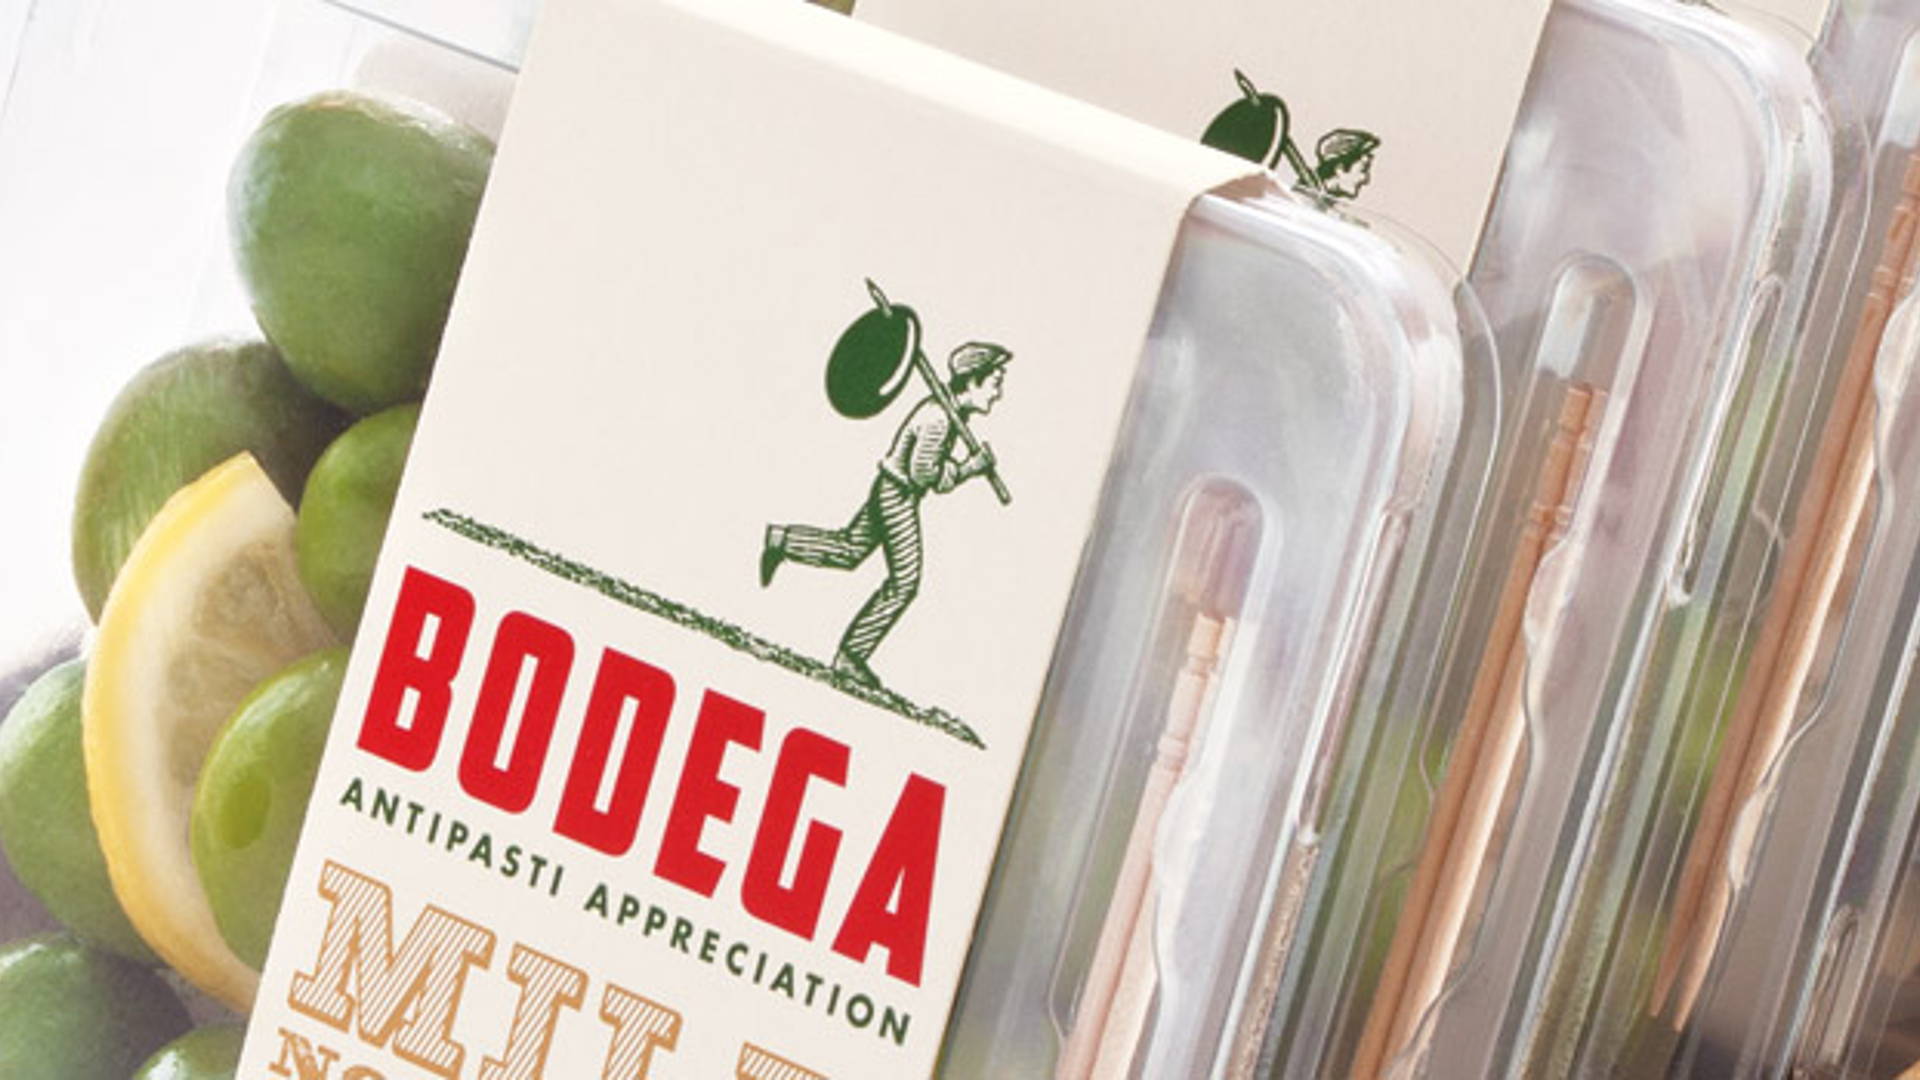 Featured image for Bodega